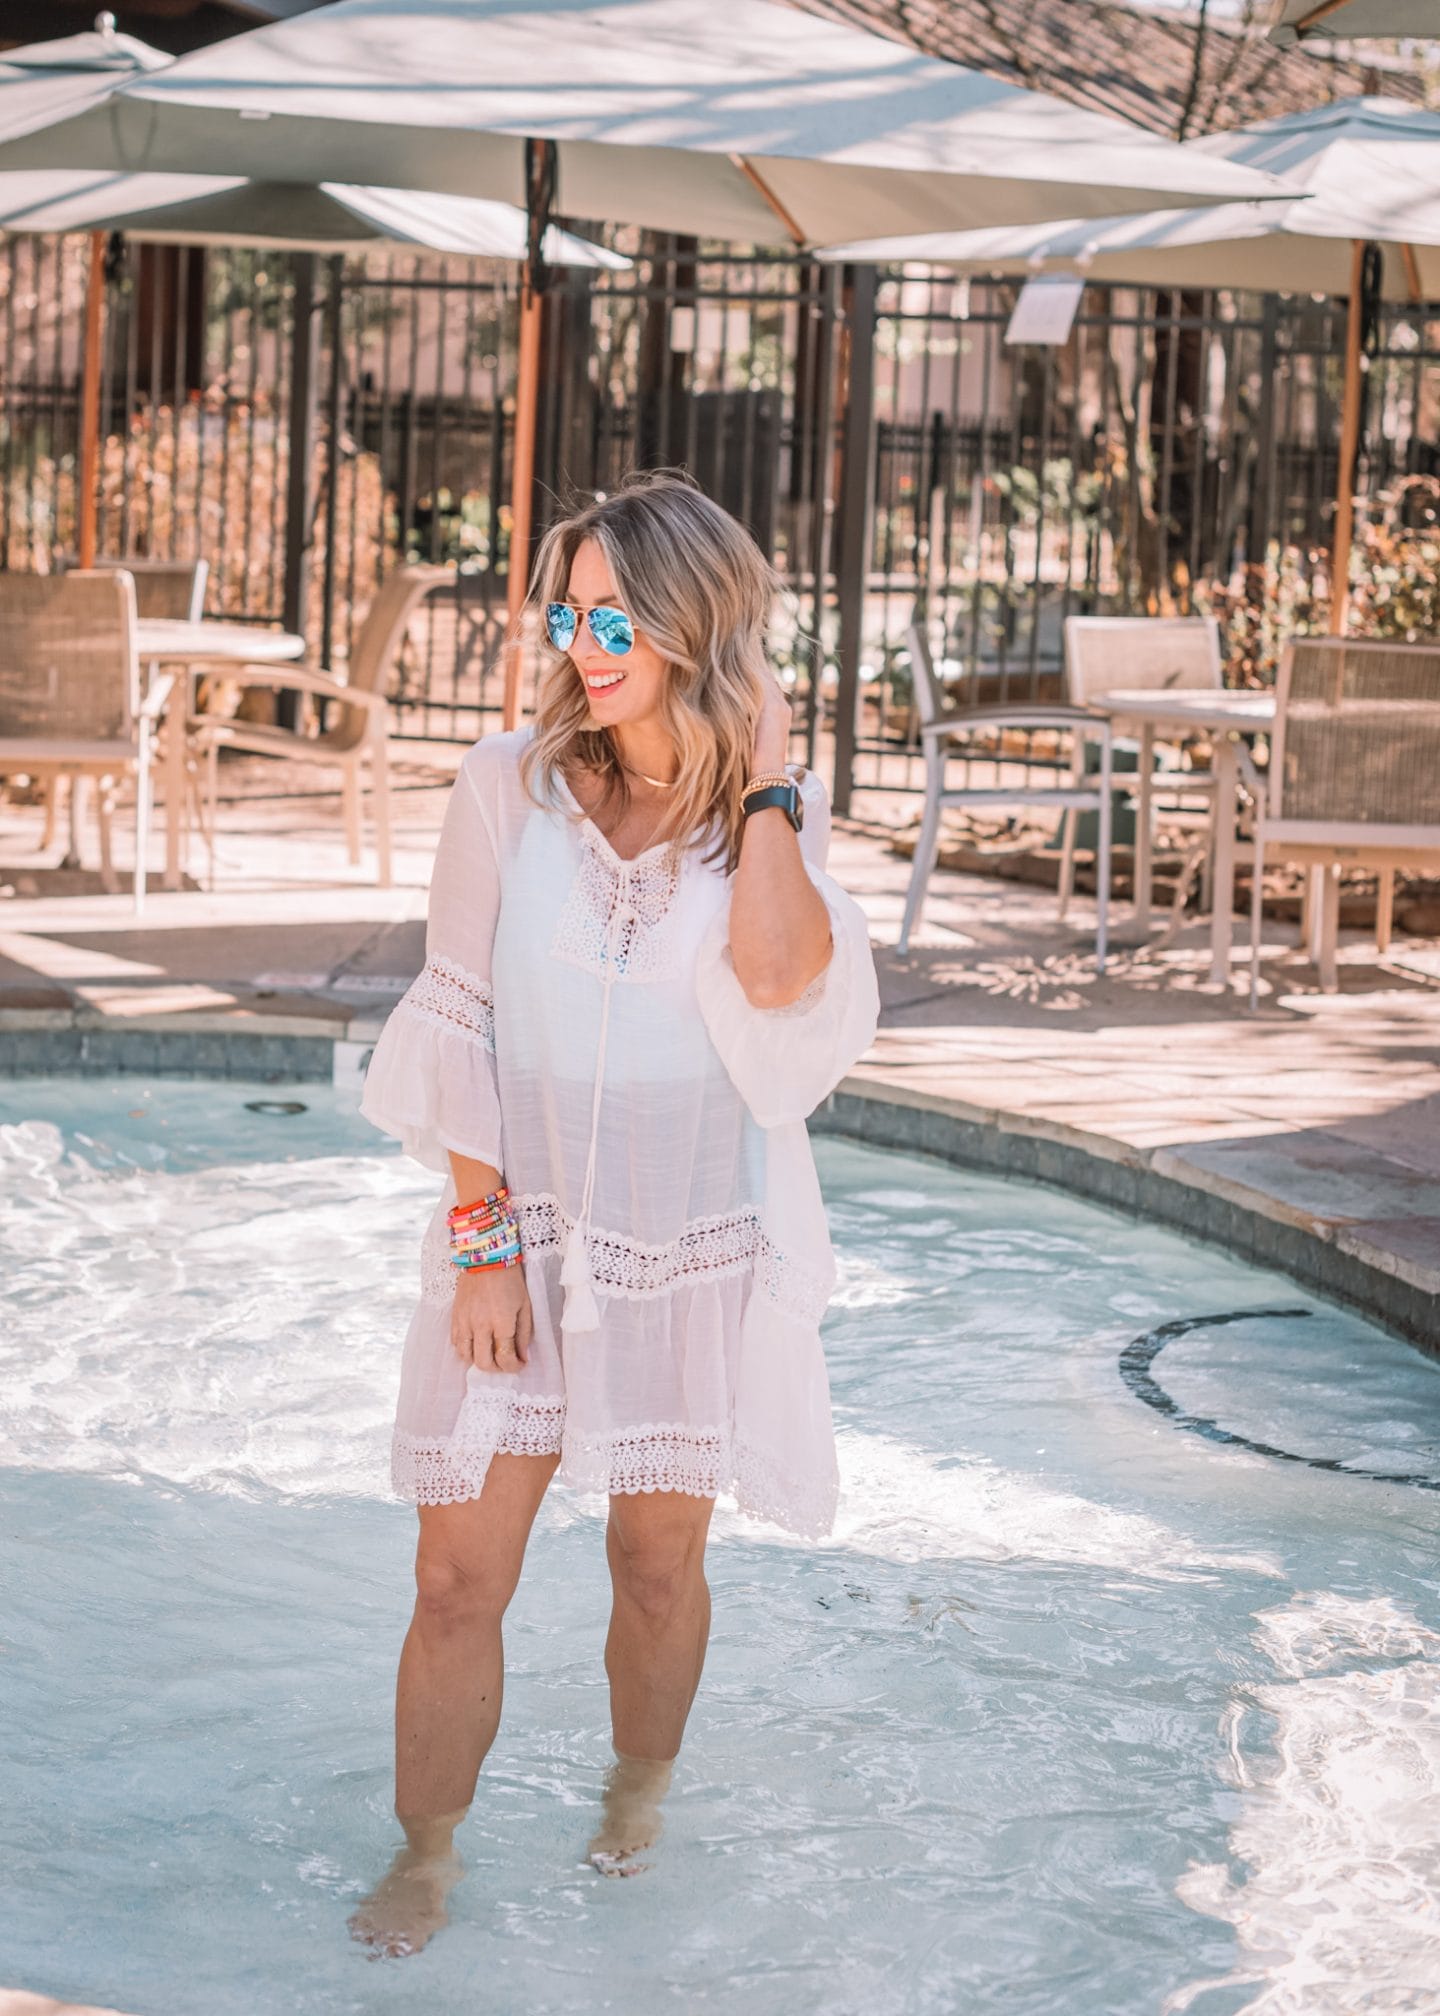 Amazon Fashion Faves, Swimsuit Cover Up, Sunglasses 